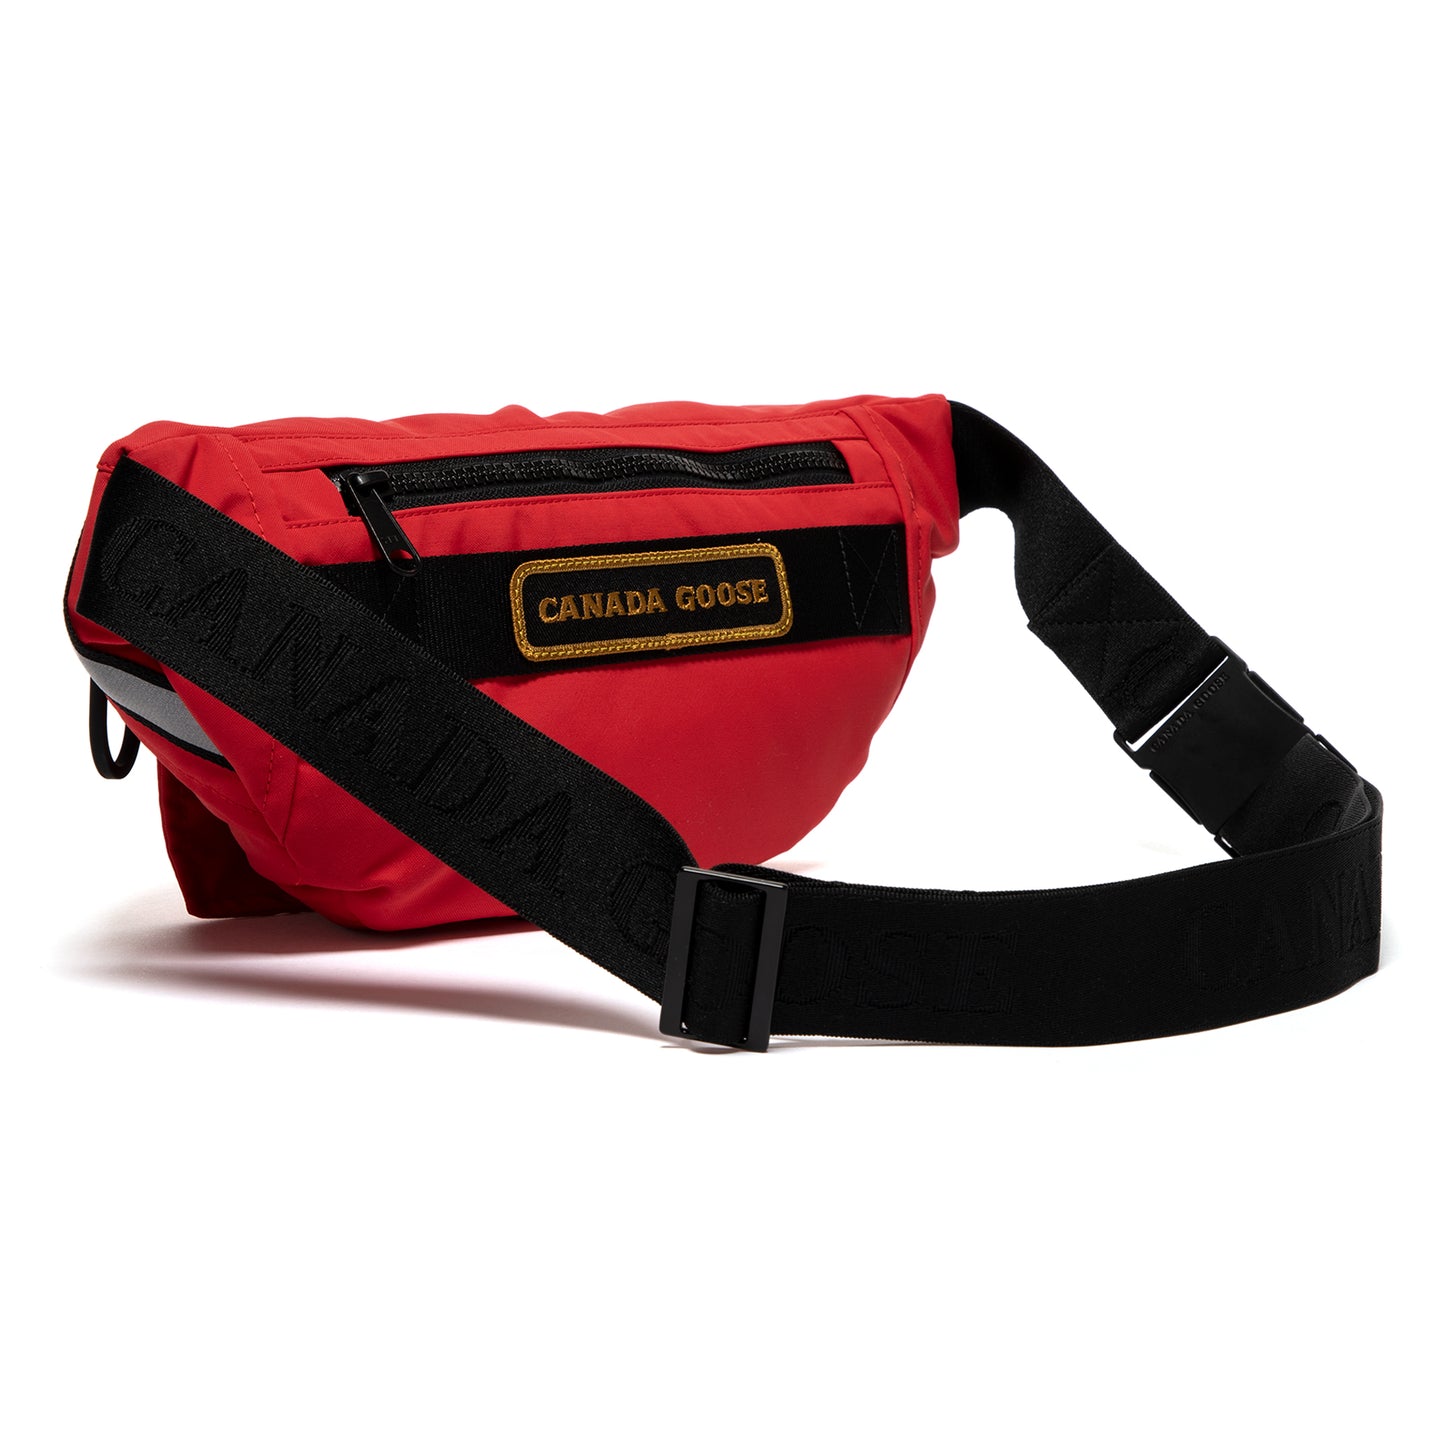 Canada Goose Waist Pack (Red)